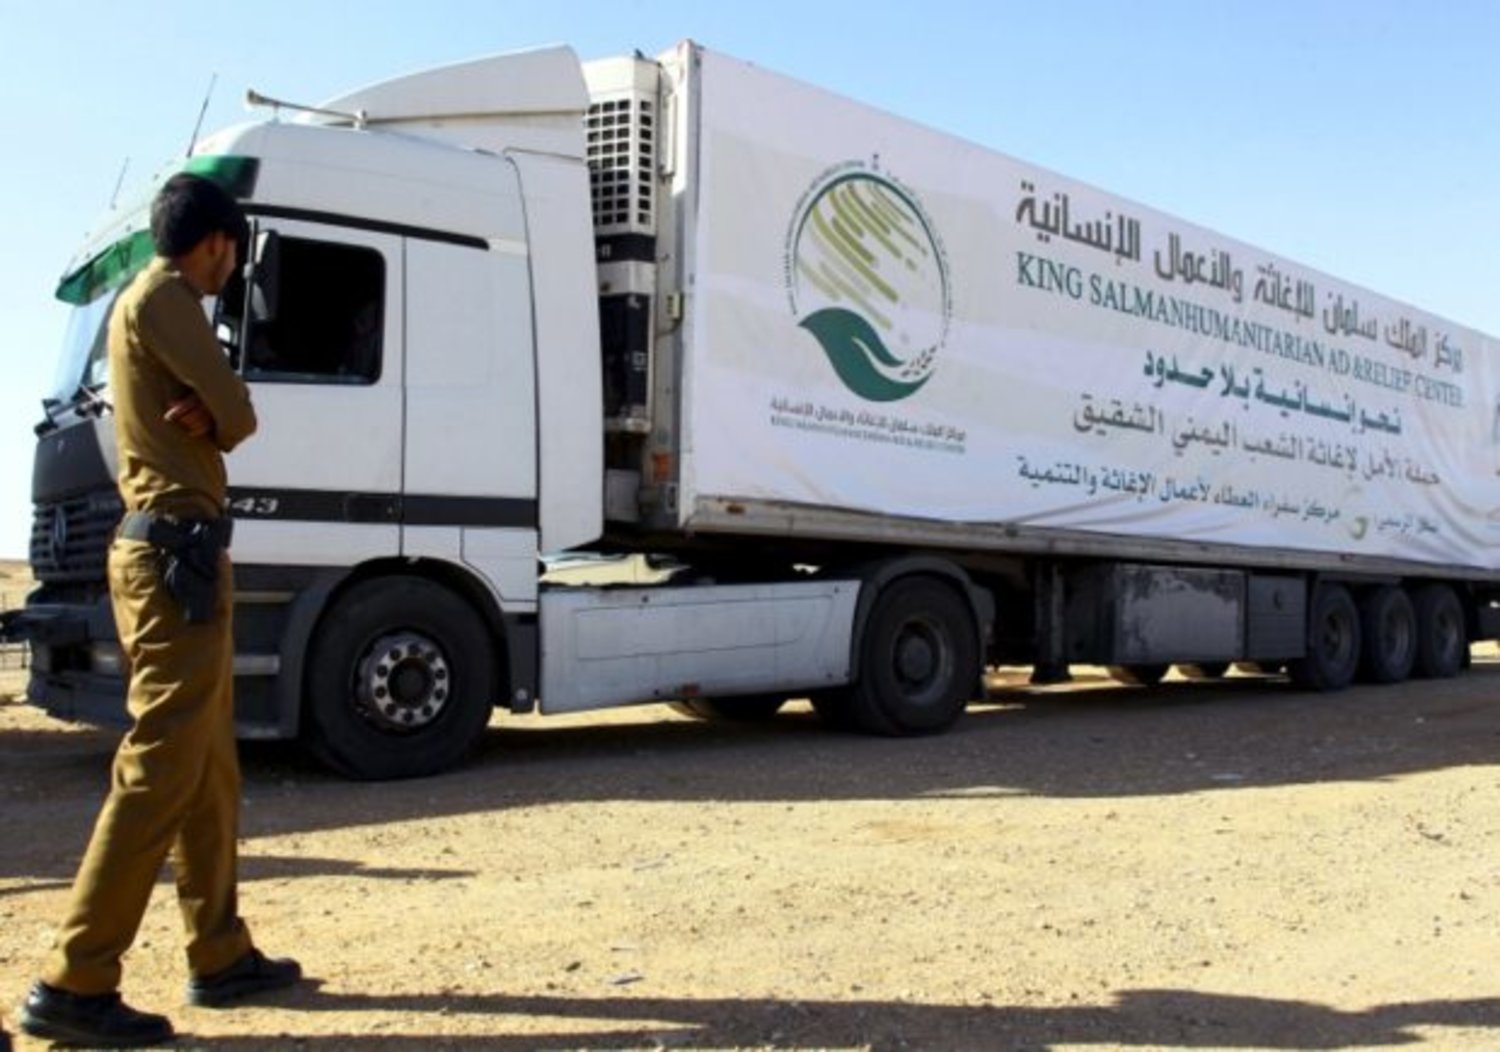  A Saudi security personnel stands next to a truck loaded with aid offered by King Salman Center for Relief and Humanitarian Aid to be sent to the Yemeni people, in Riyadh April 17, 2016. (REUTERS/Faisal Al Nasser)